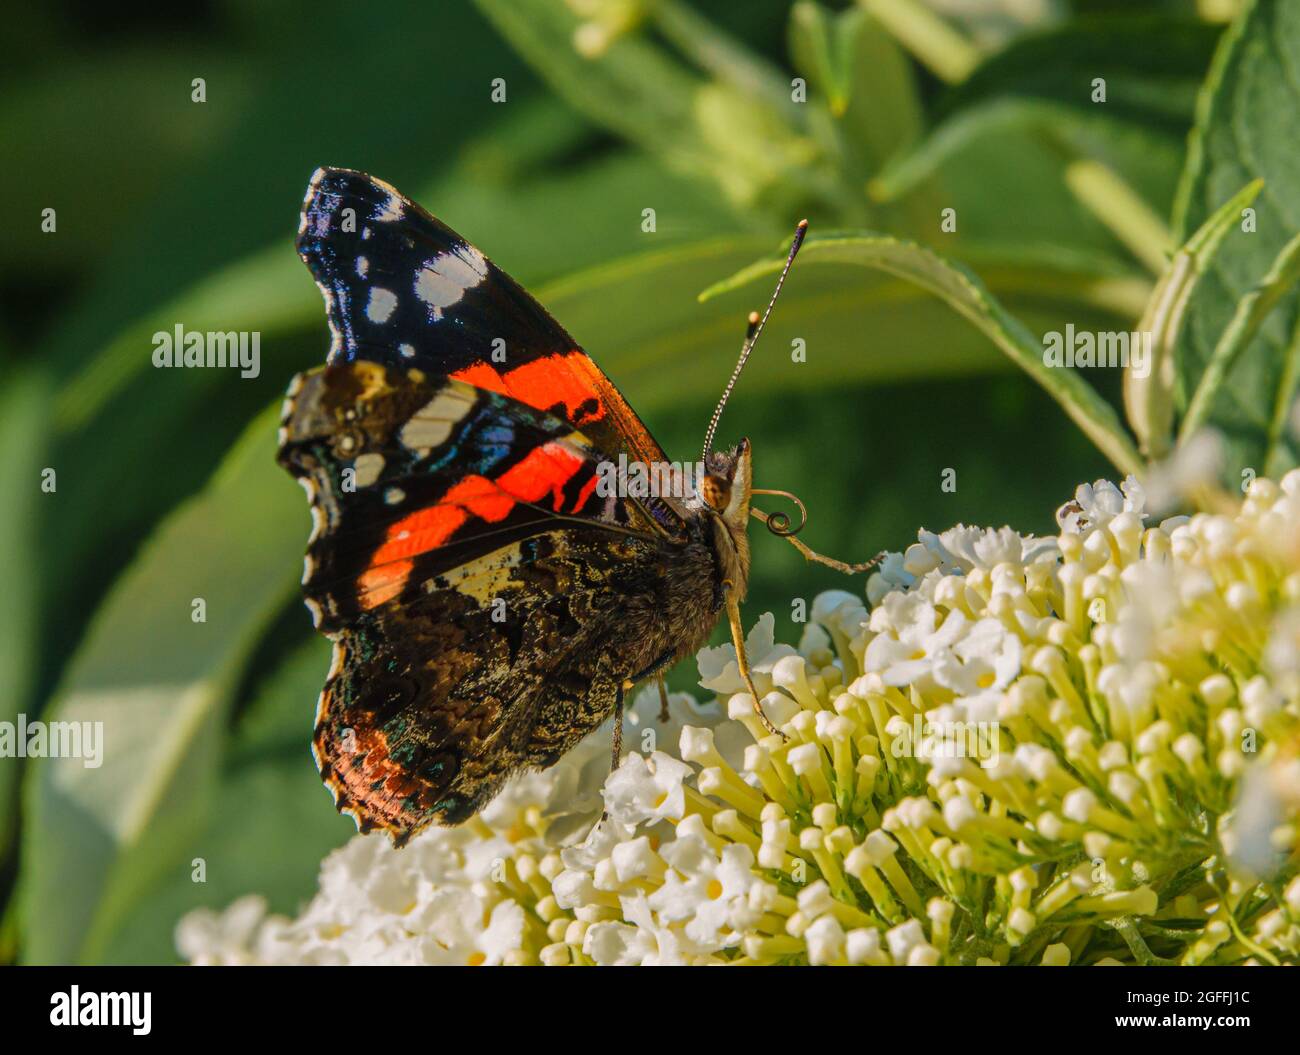 close up of a Red Admiral butterfly (Vanessa atalanta) feeding on a buddleja davidii (white profusion) butterfly bush, Wiltshire UK Stock Photo